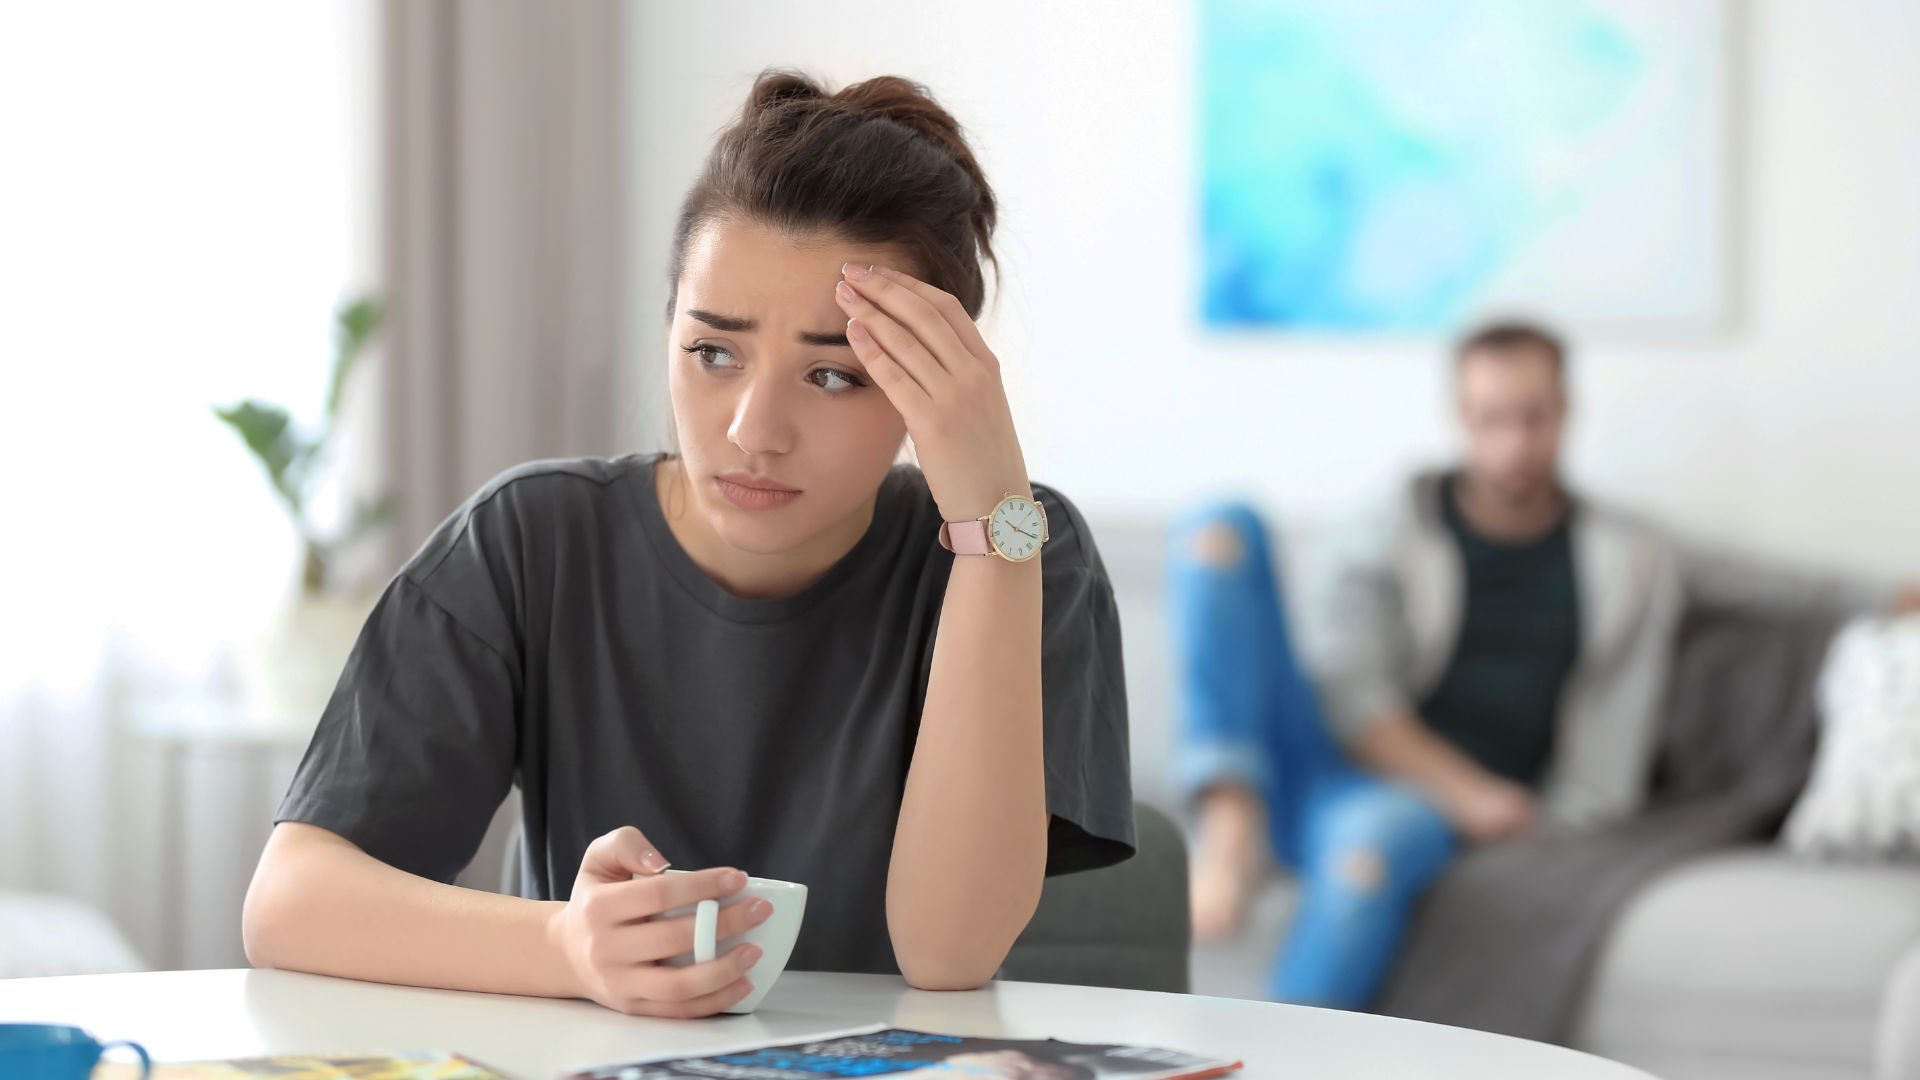 She's bored of the relationship and worries that a marriage would be even worse